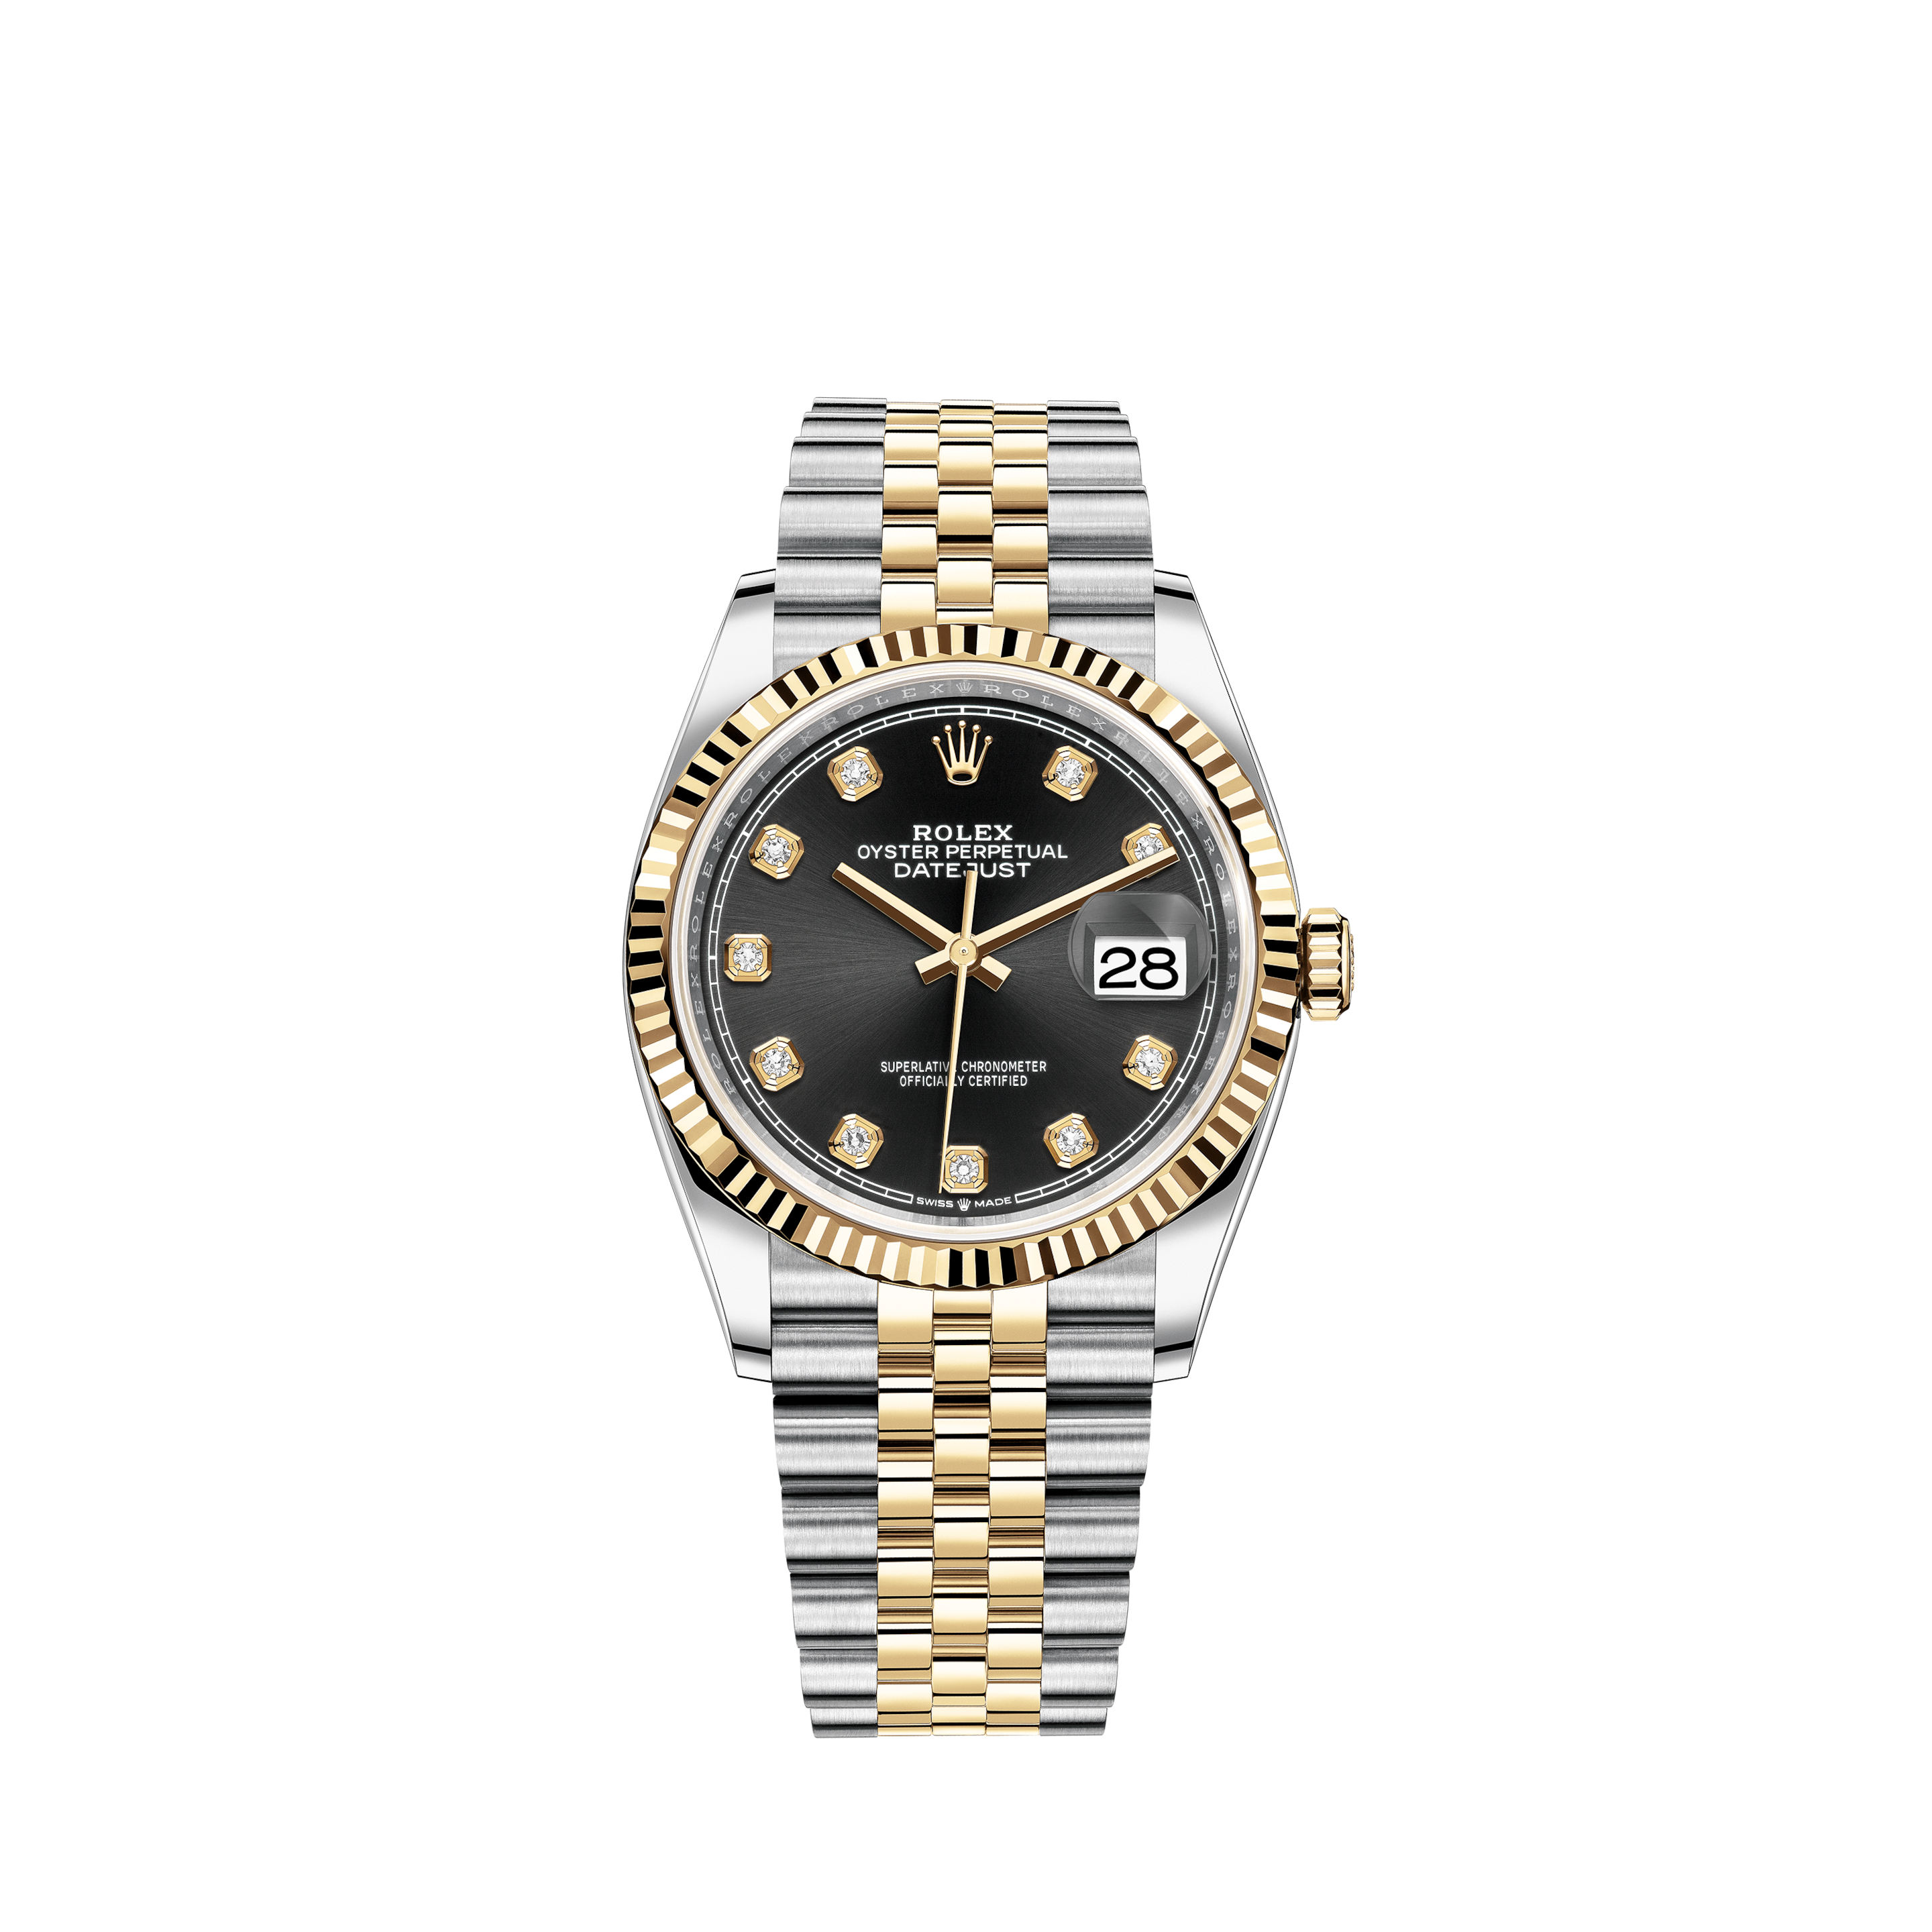 Rolex Datejust Steel White Gold Silver Wide Boy Dial Vintage Mens Watch 1601Rolex Submariner 116610LN Box and Papers 2017 Full Set 40mm discontinued model